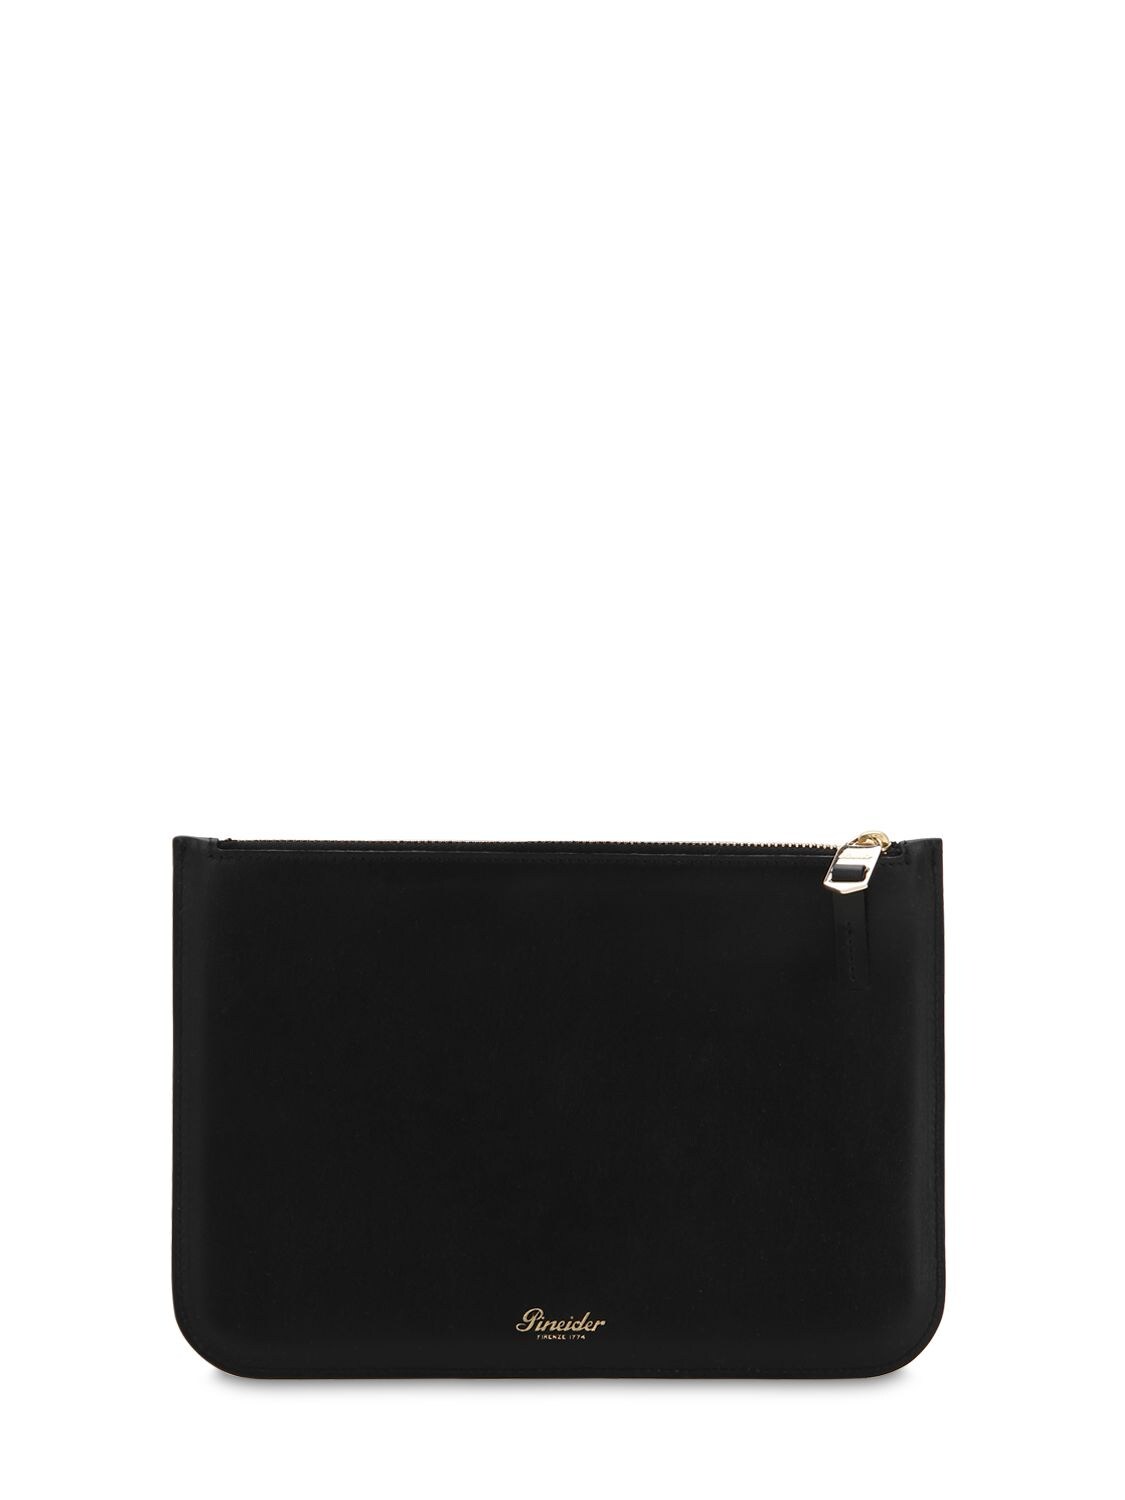 Pineider 720 Leather Pouch In Black